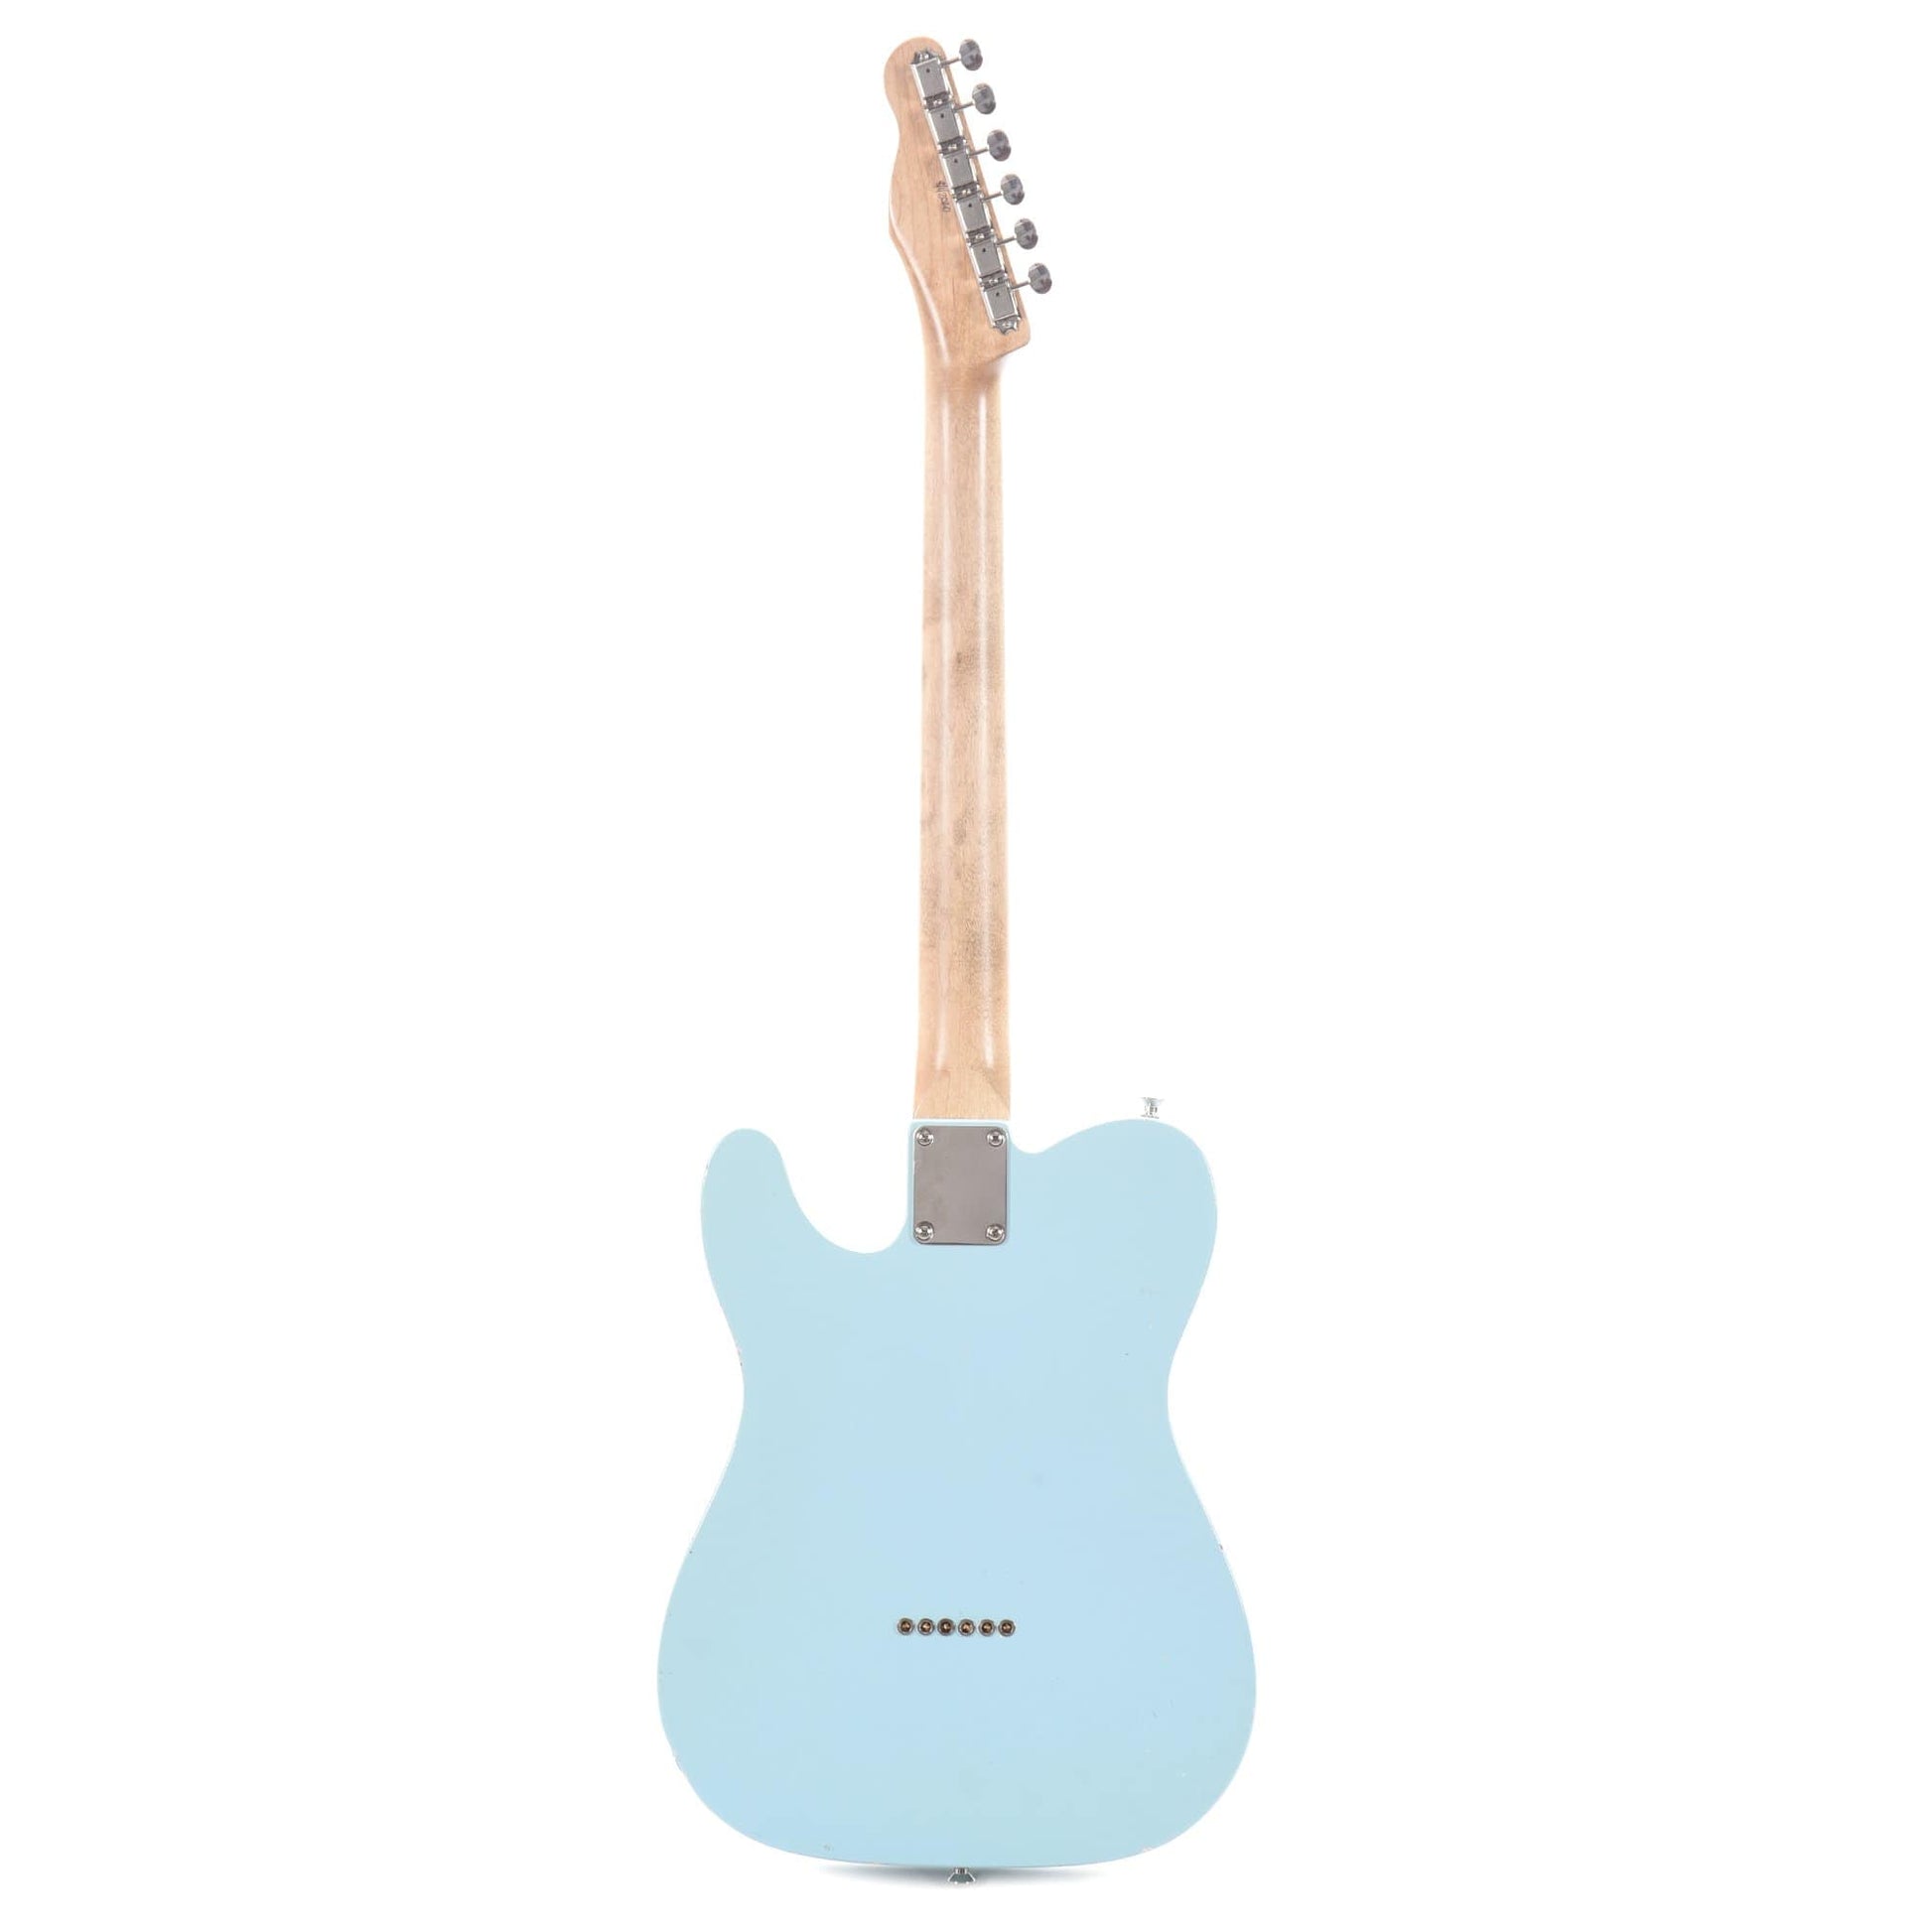 Waterslide T-Style Coodercaster Sonic Blue w/Mojo Lap Steel & Gold Foil Pickup Electric Guitars / Solid Body,Electric Guitars / Travel / Mini